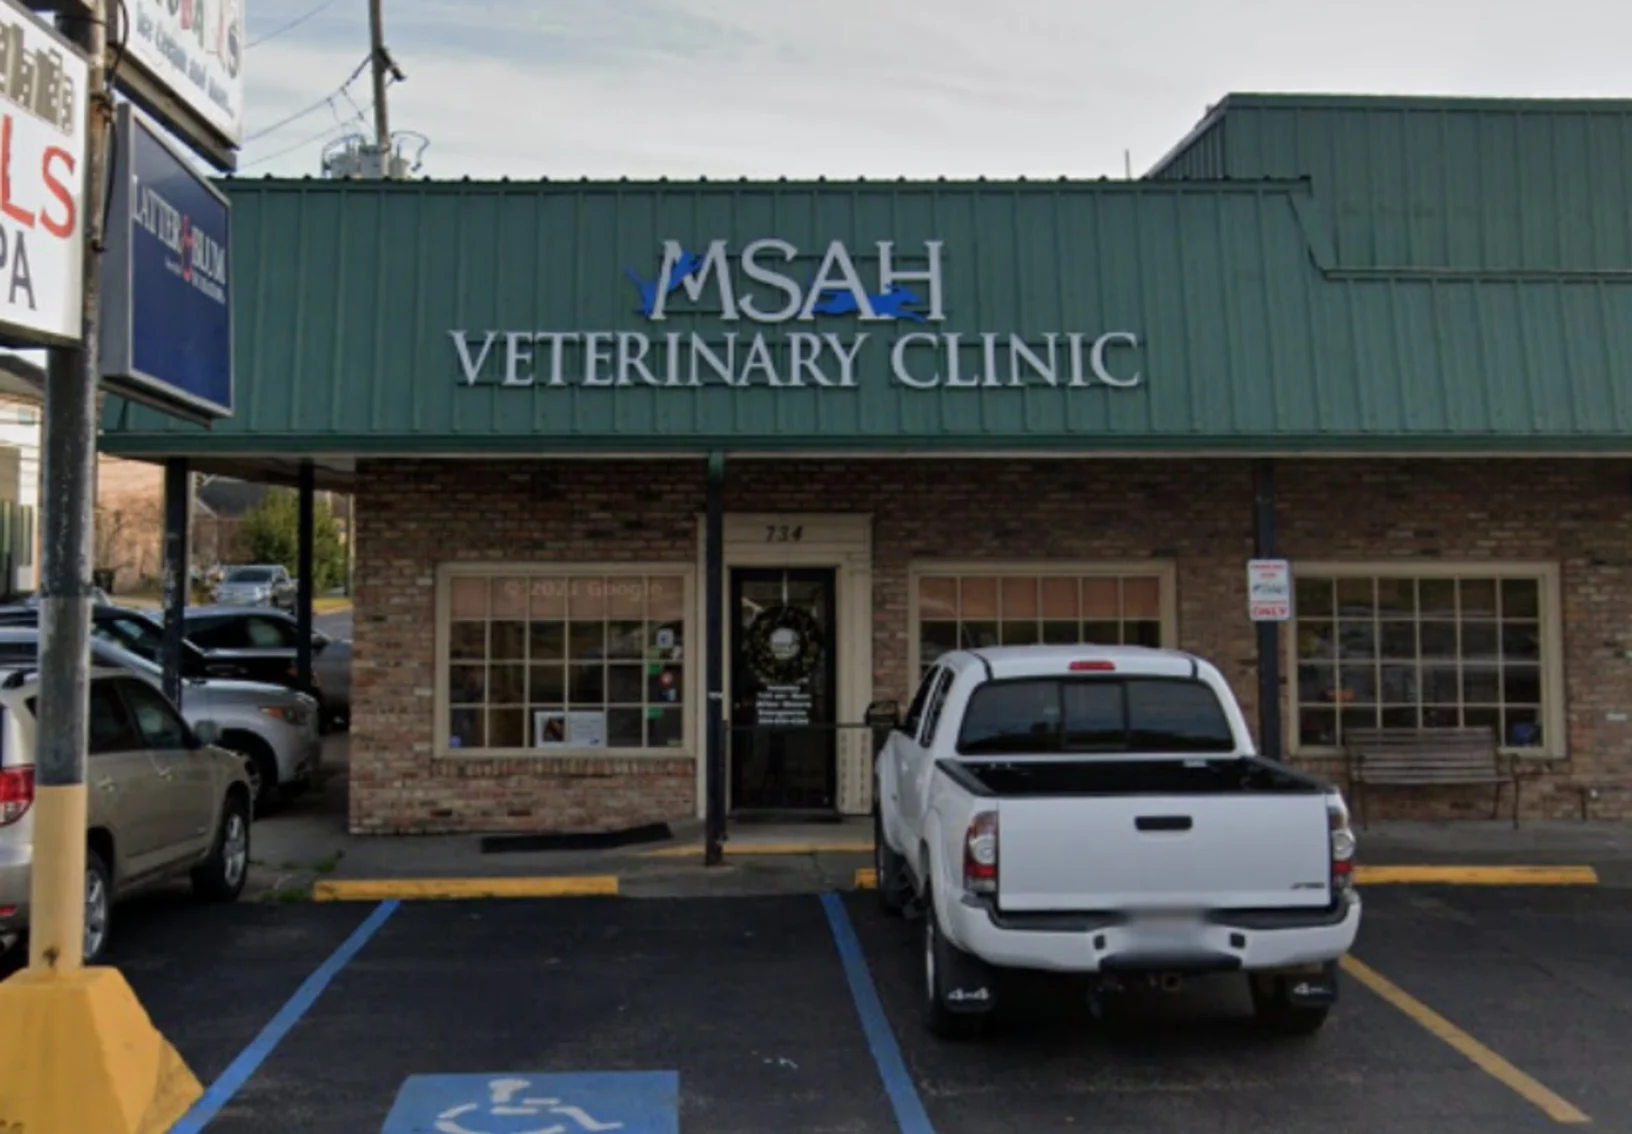 Metairie Small Animal Hospital (MSAH) - Lakeview Clinic Exterior